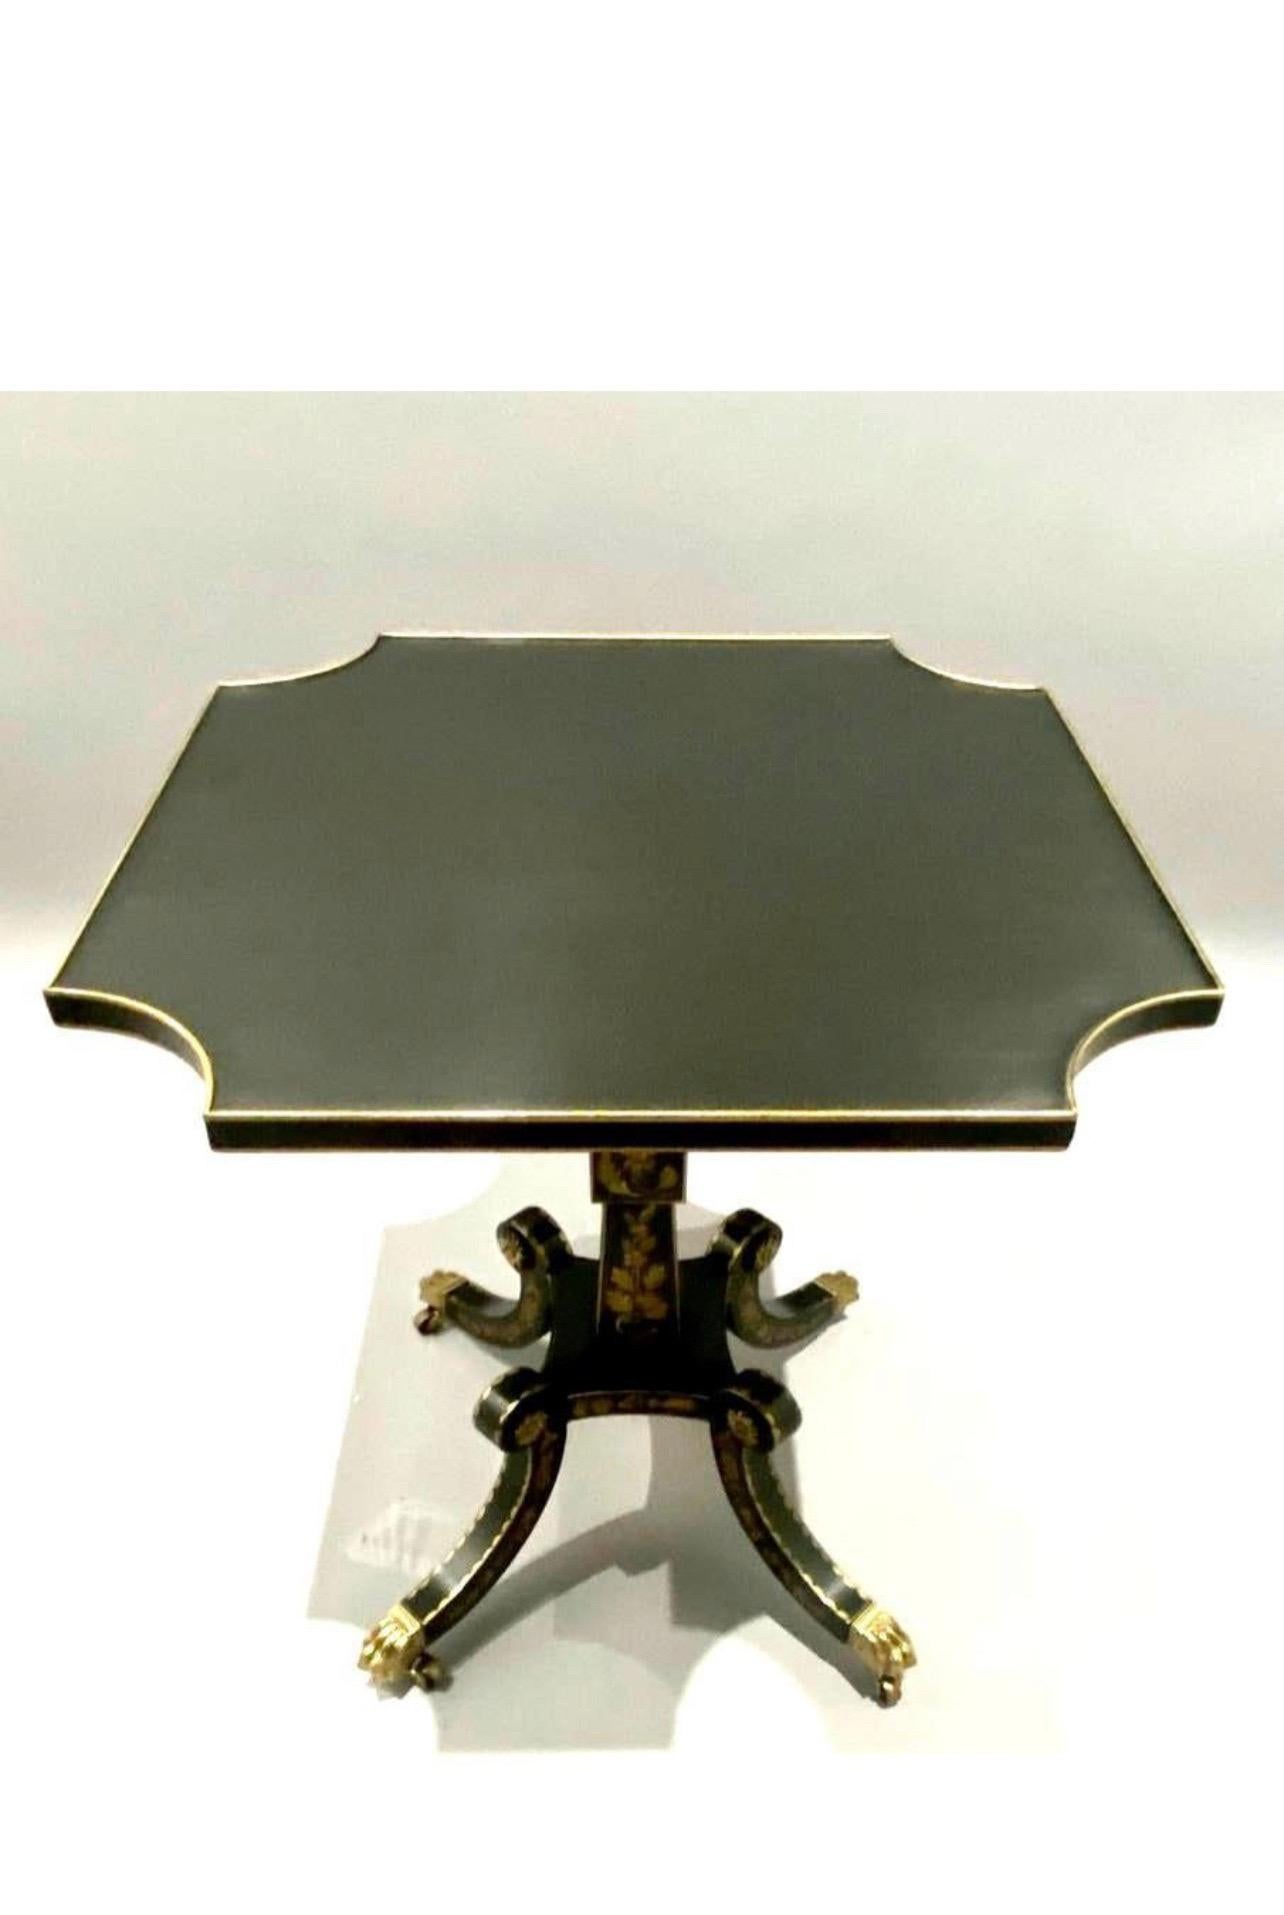 Spectacular EJ Victor piece. Newport Historic Collection Table raised on a four sided pedestal base with scrolled legs, gold guilt, and hand painting, finishing on brass paw feet and casters.


Condition Disclosure:
Please understand nearly all of